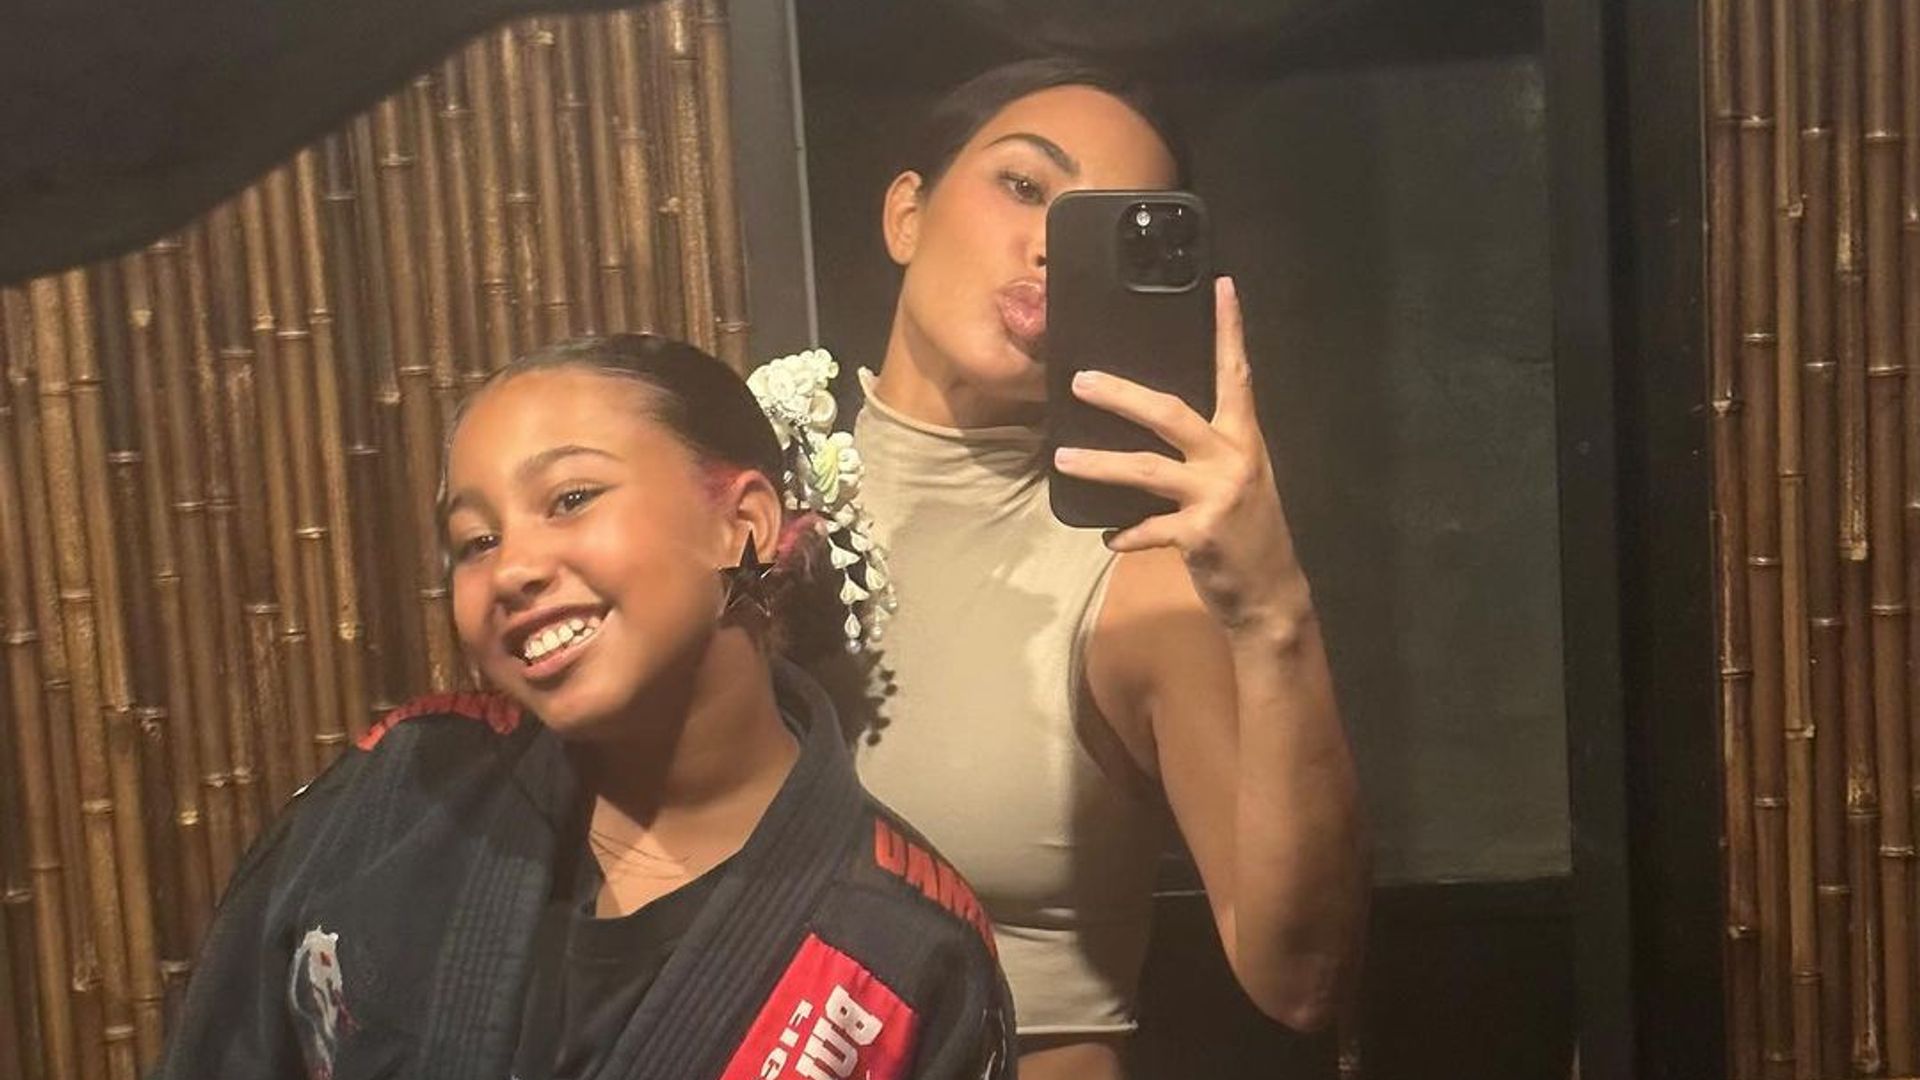 Kim Kardashian opens up about daughter North West’s 'ridiculous' TikTok dances she ‘makes’ her do